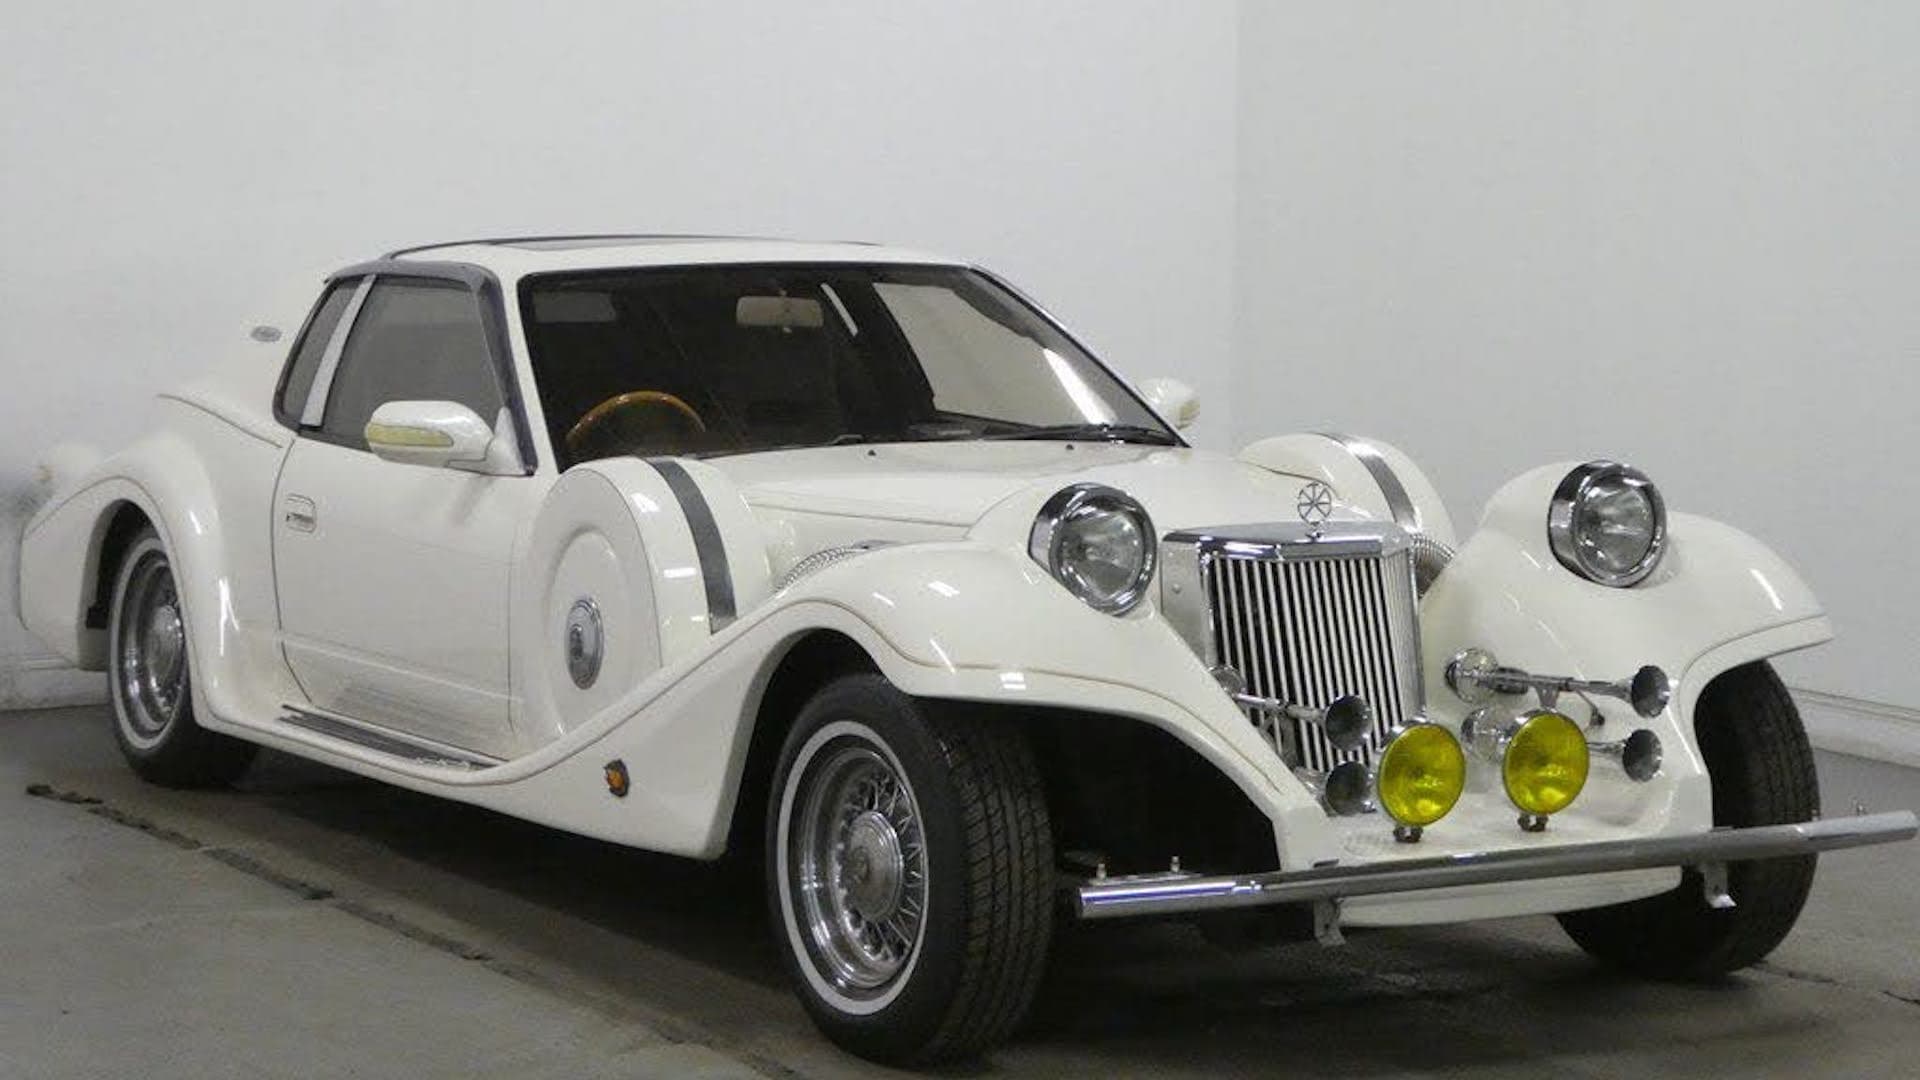 Finally—A Nissan 180SX-Based Mitsuoka Le-Seyde Is For Sale in the US